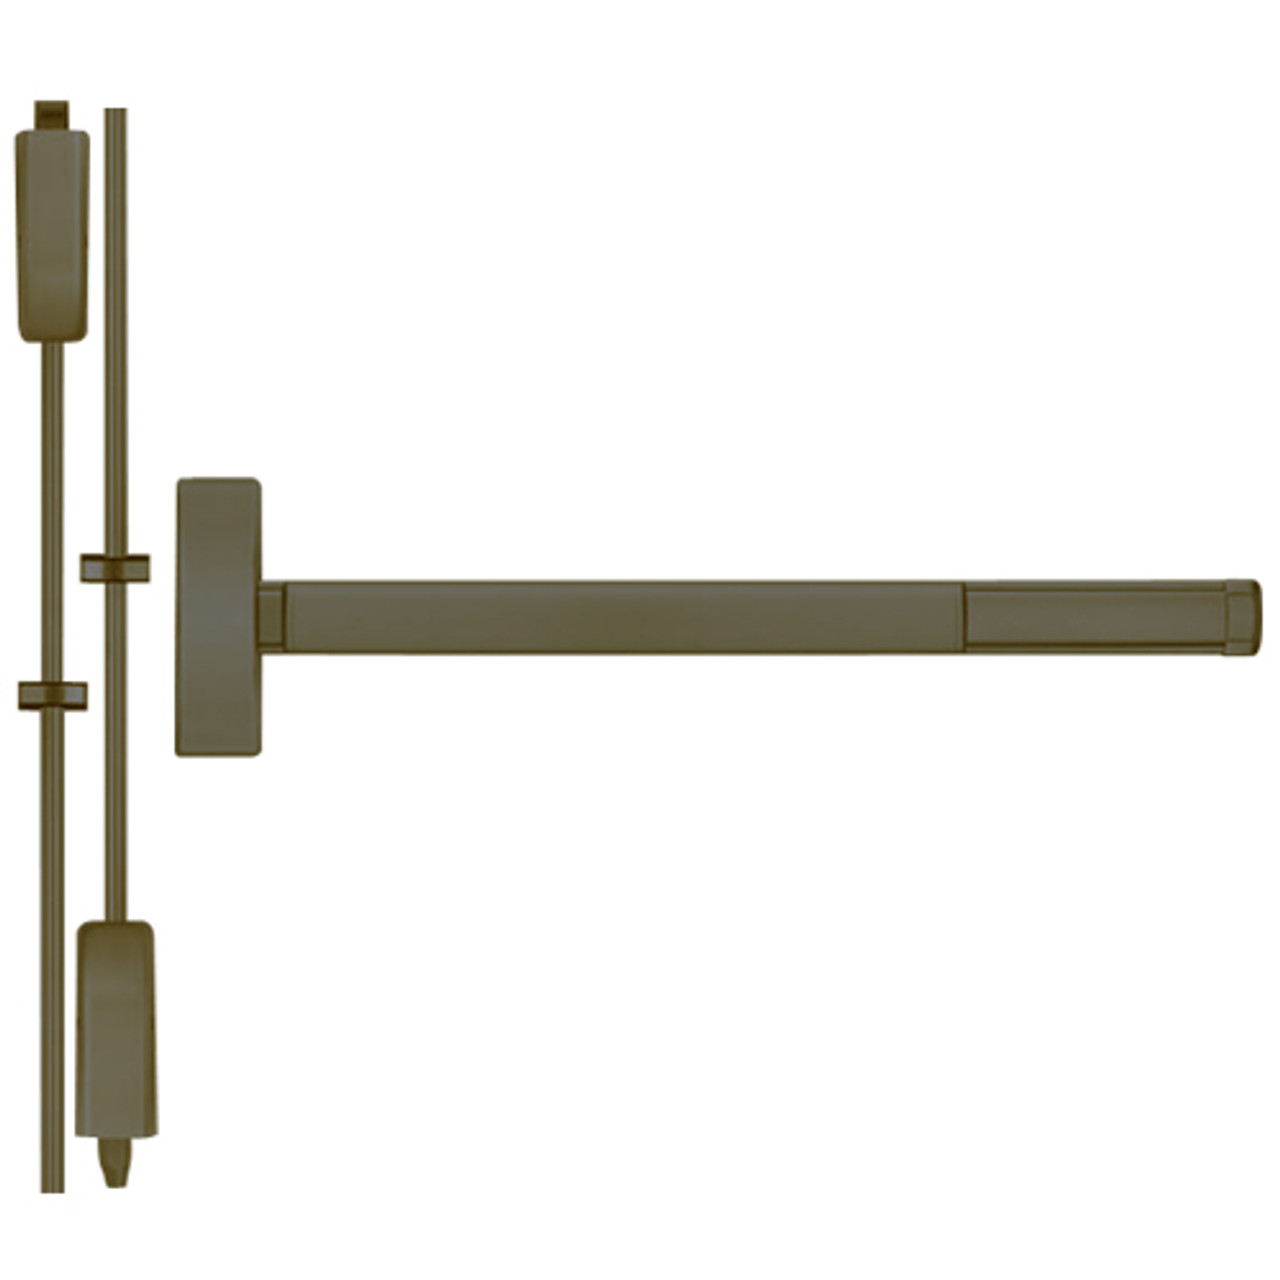 DEFL2214LBR-613-36 PHI 2200 Series Fire Rated Apex Surface Vertical Rod Device with Delayed Egress Prepped for Lever-Knob Always Active in Oil Rubbed Bronze Finish